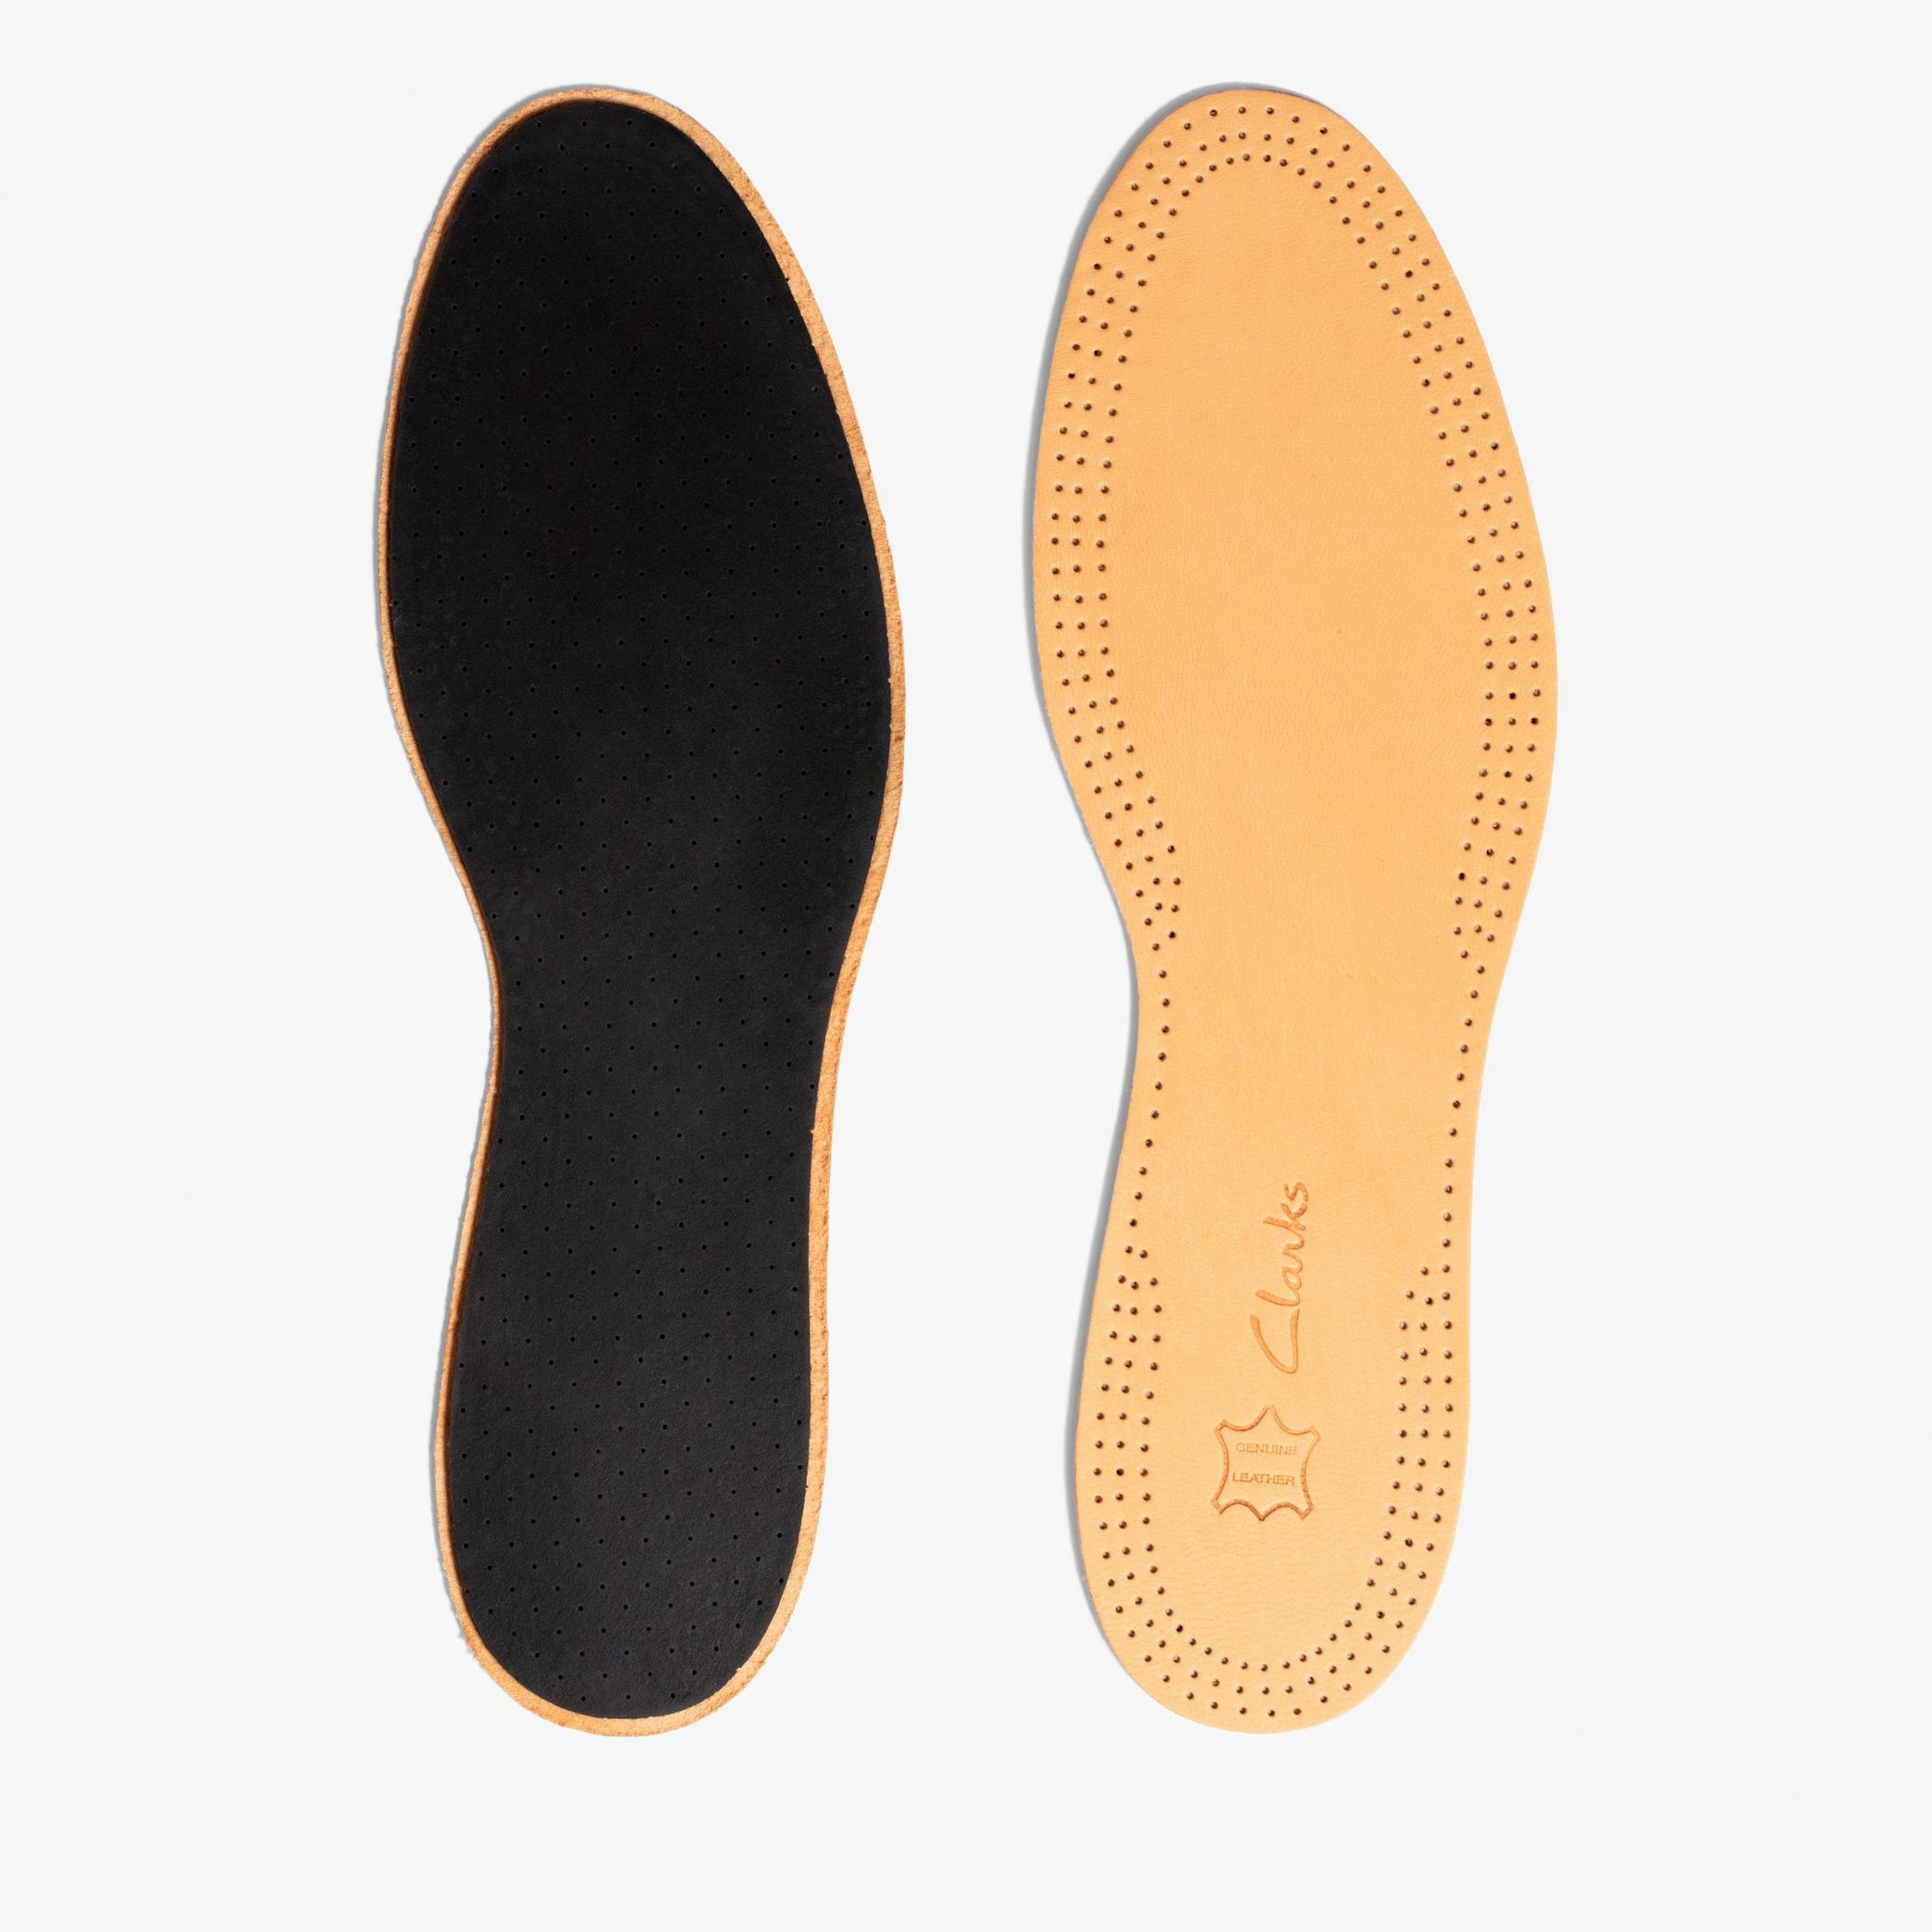 Leather insole size 4  Insoles, view 2 of 3